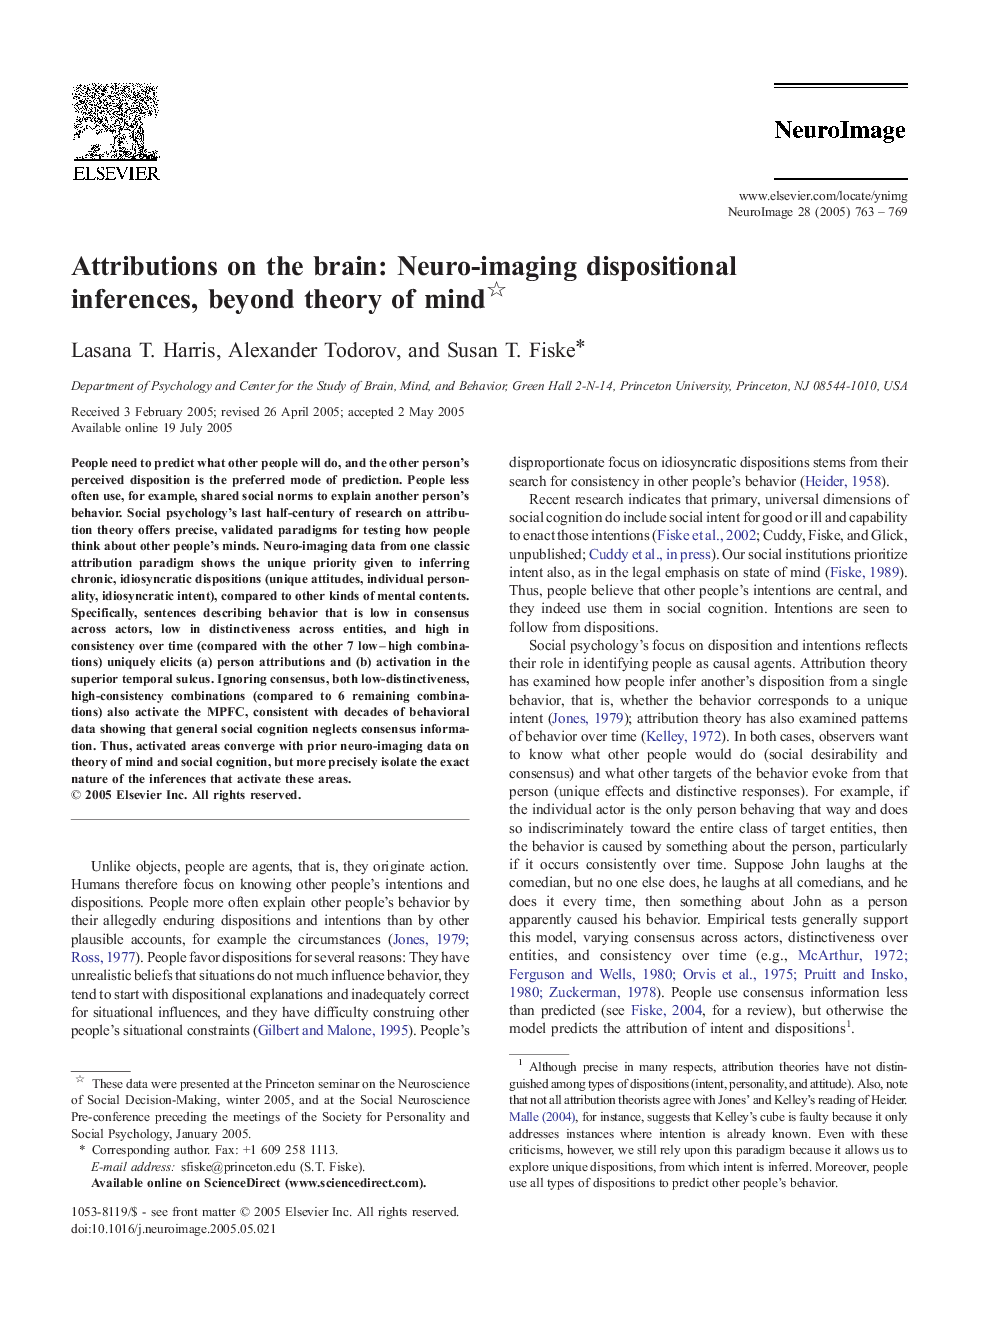 Attributions on the brain: Neuro-imaging dispositional inferences, beyond theory of mind